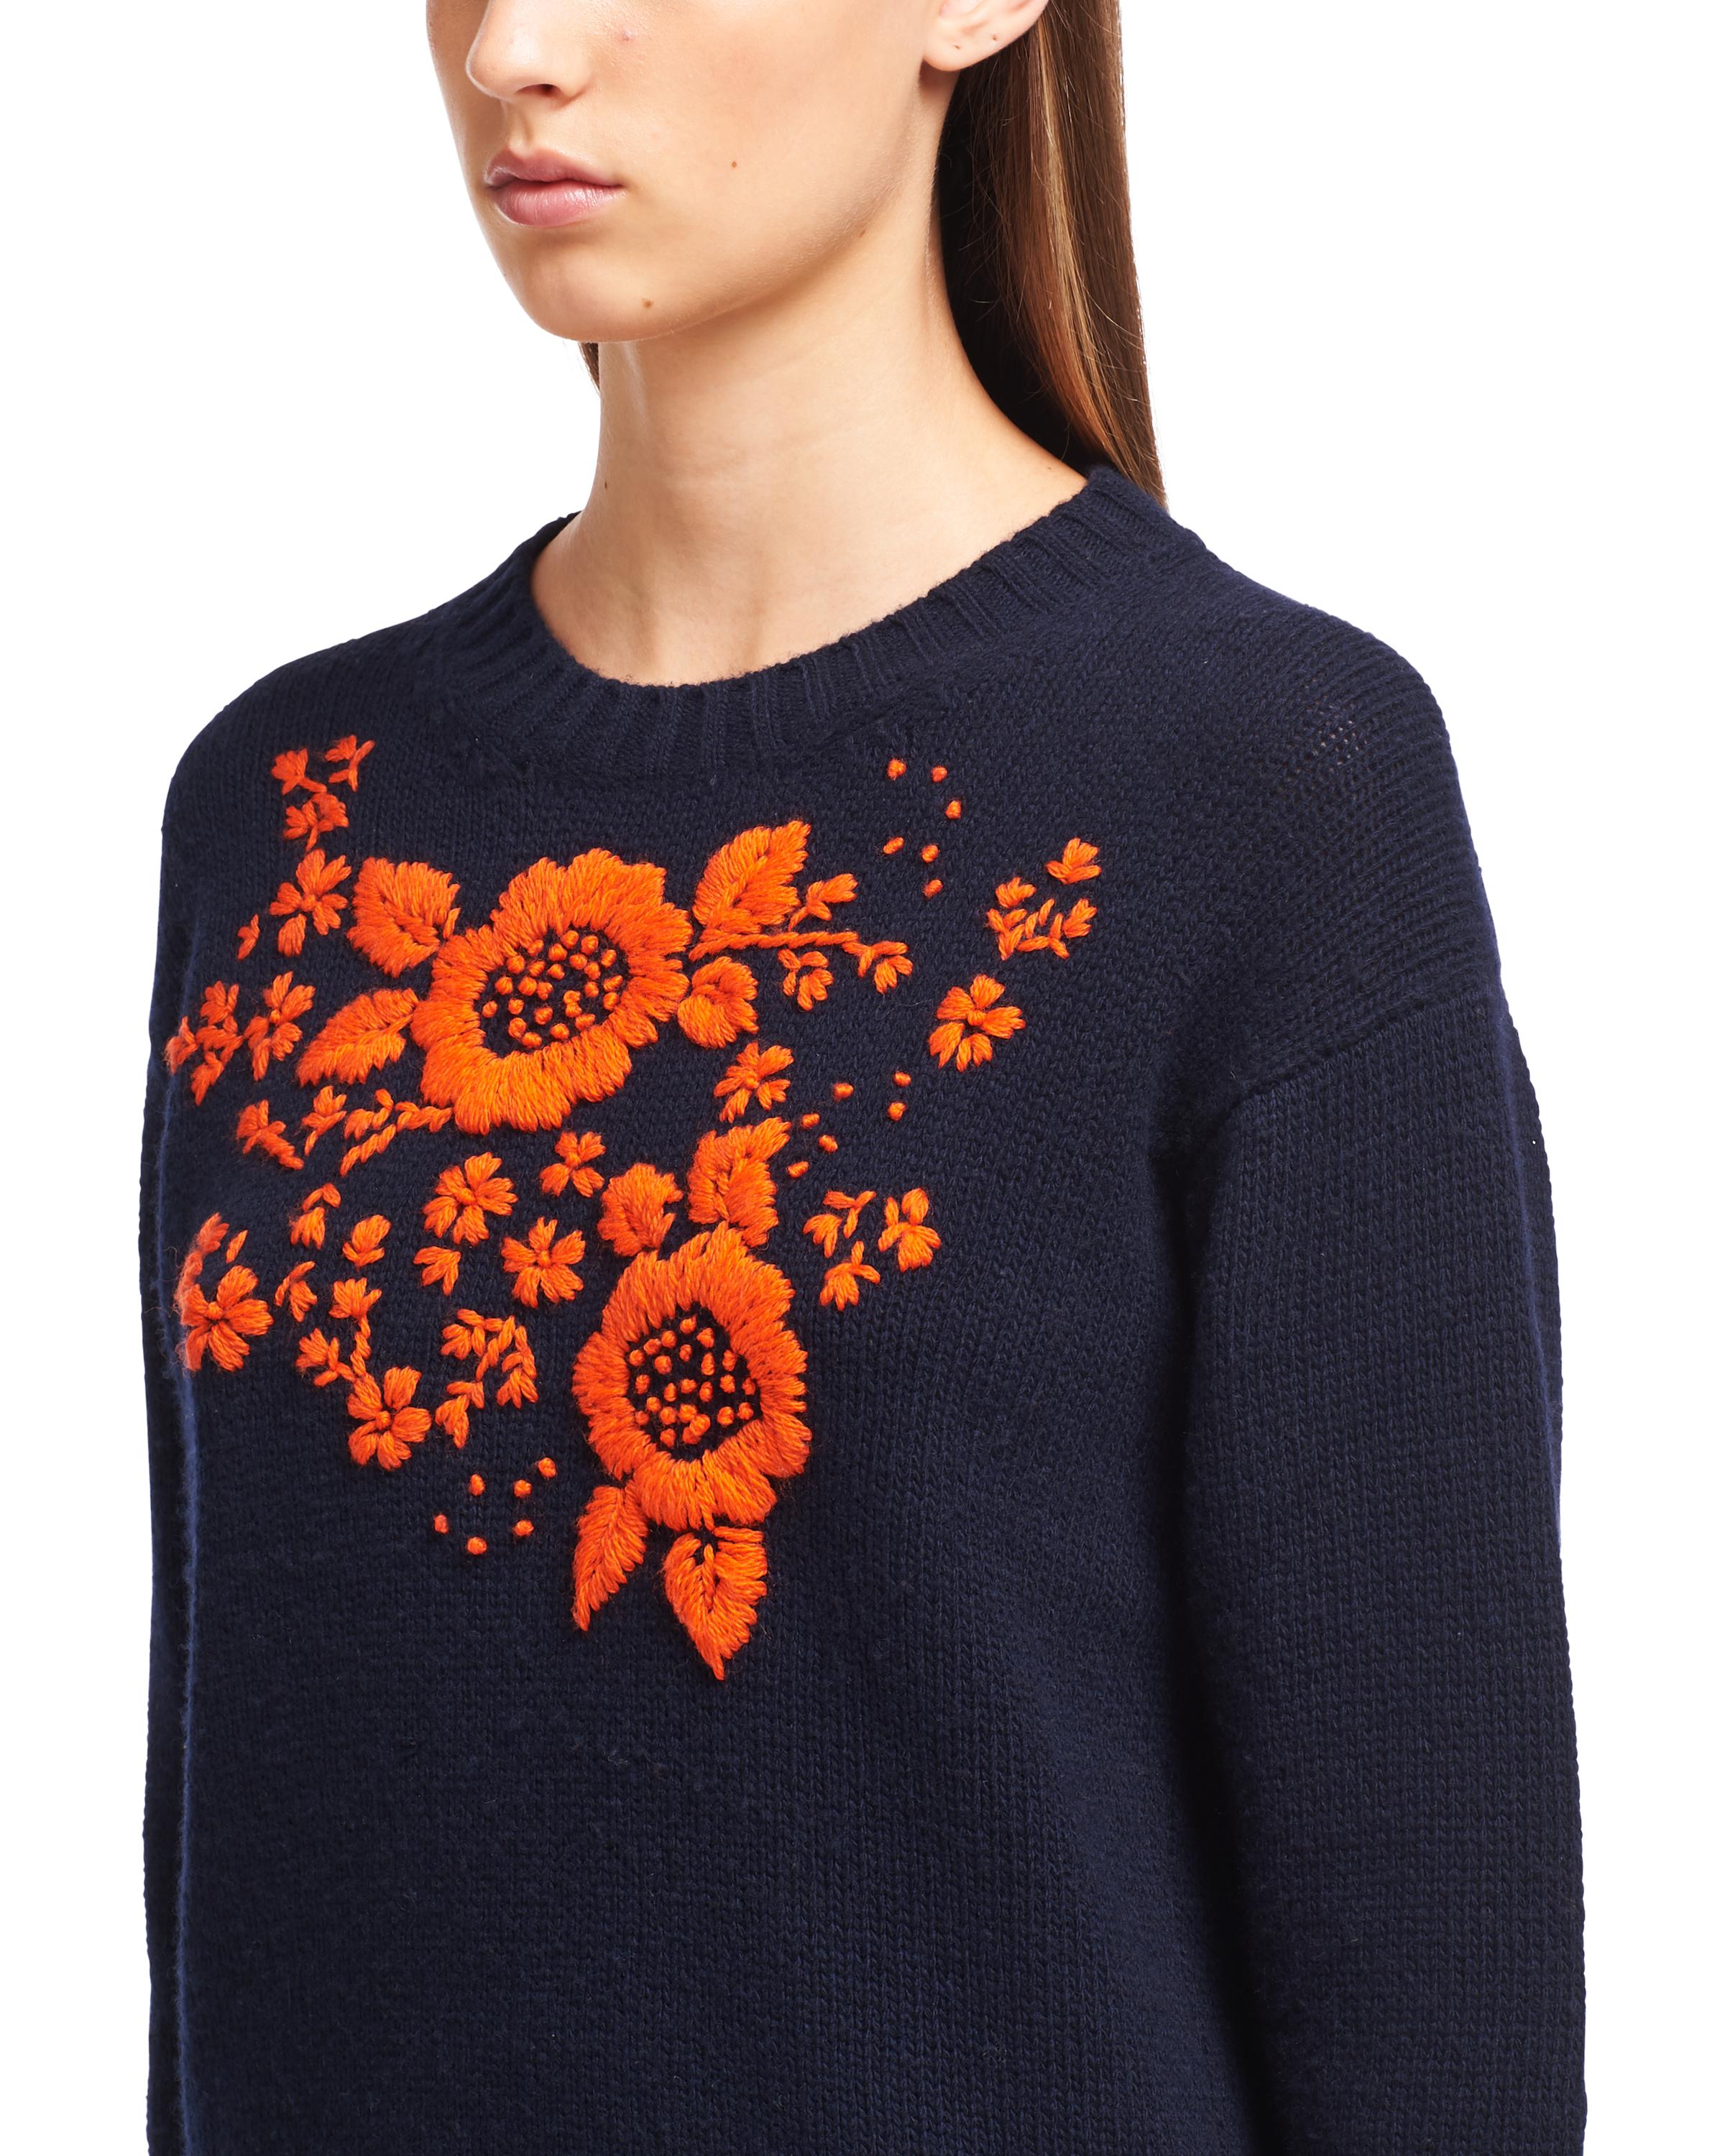 Prada Embroidered Wool And Cashmere Crew-neck Sweater in Navy Blue ...